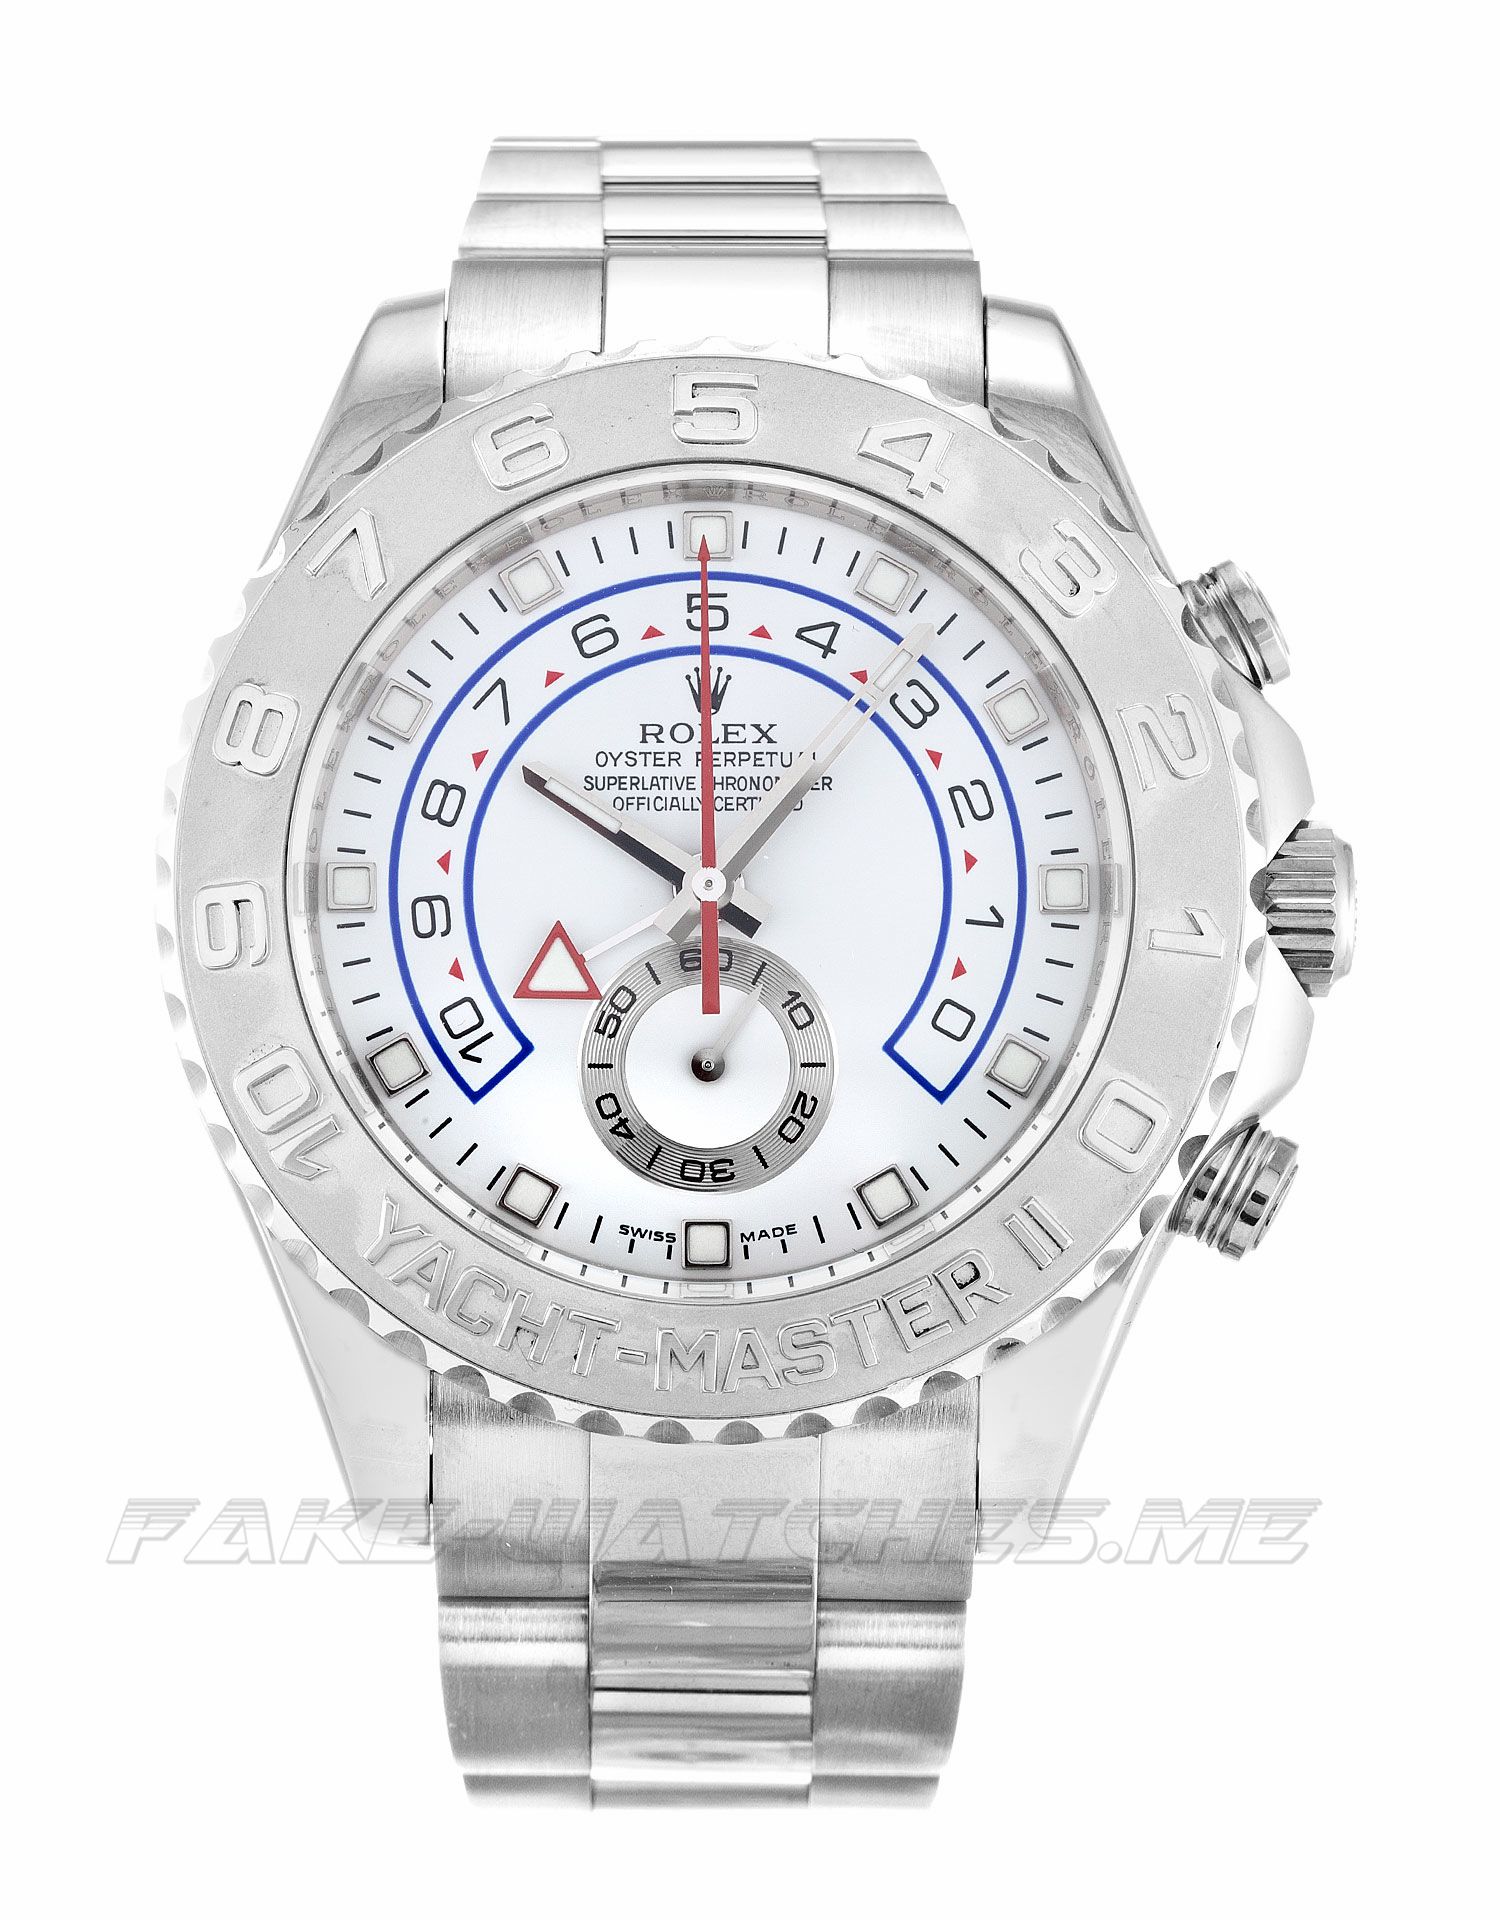 Rolex Yacht Master II Mens Automatic 116689